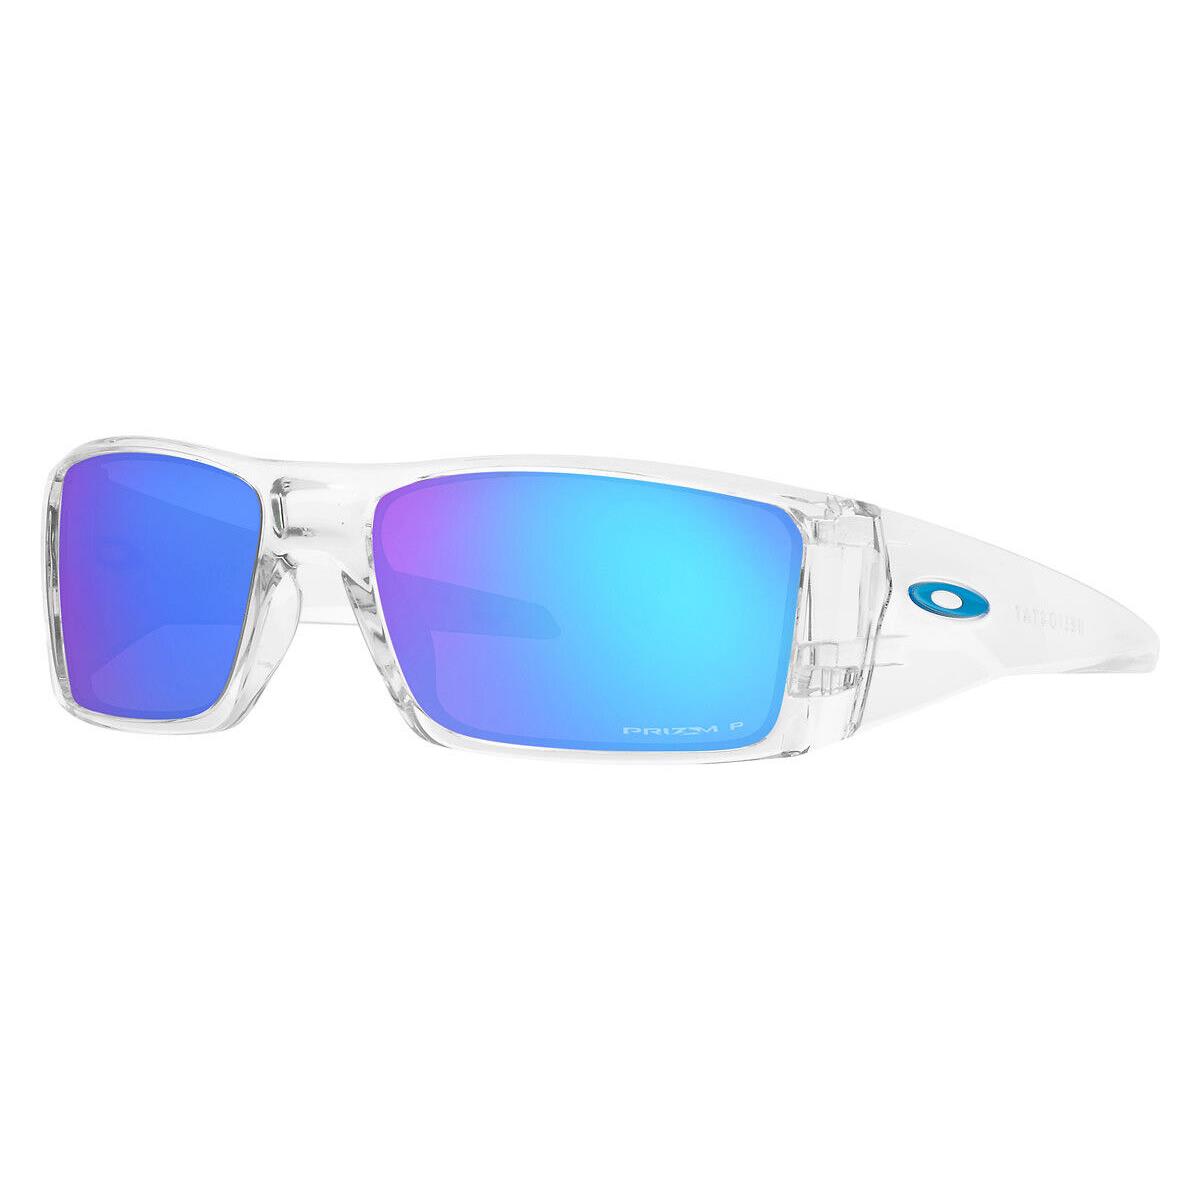 Oakley Heliostat OO9231 Sunglasses Clear Prizm Sapphire Polarized Mirrored 61mm - Frame: Clear / Prizm Sapphire Polarized Mirrored, Lens: Prizm Sapphire Polarized Mirrored